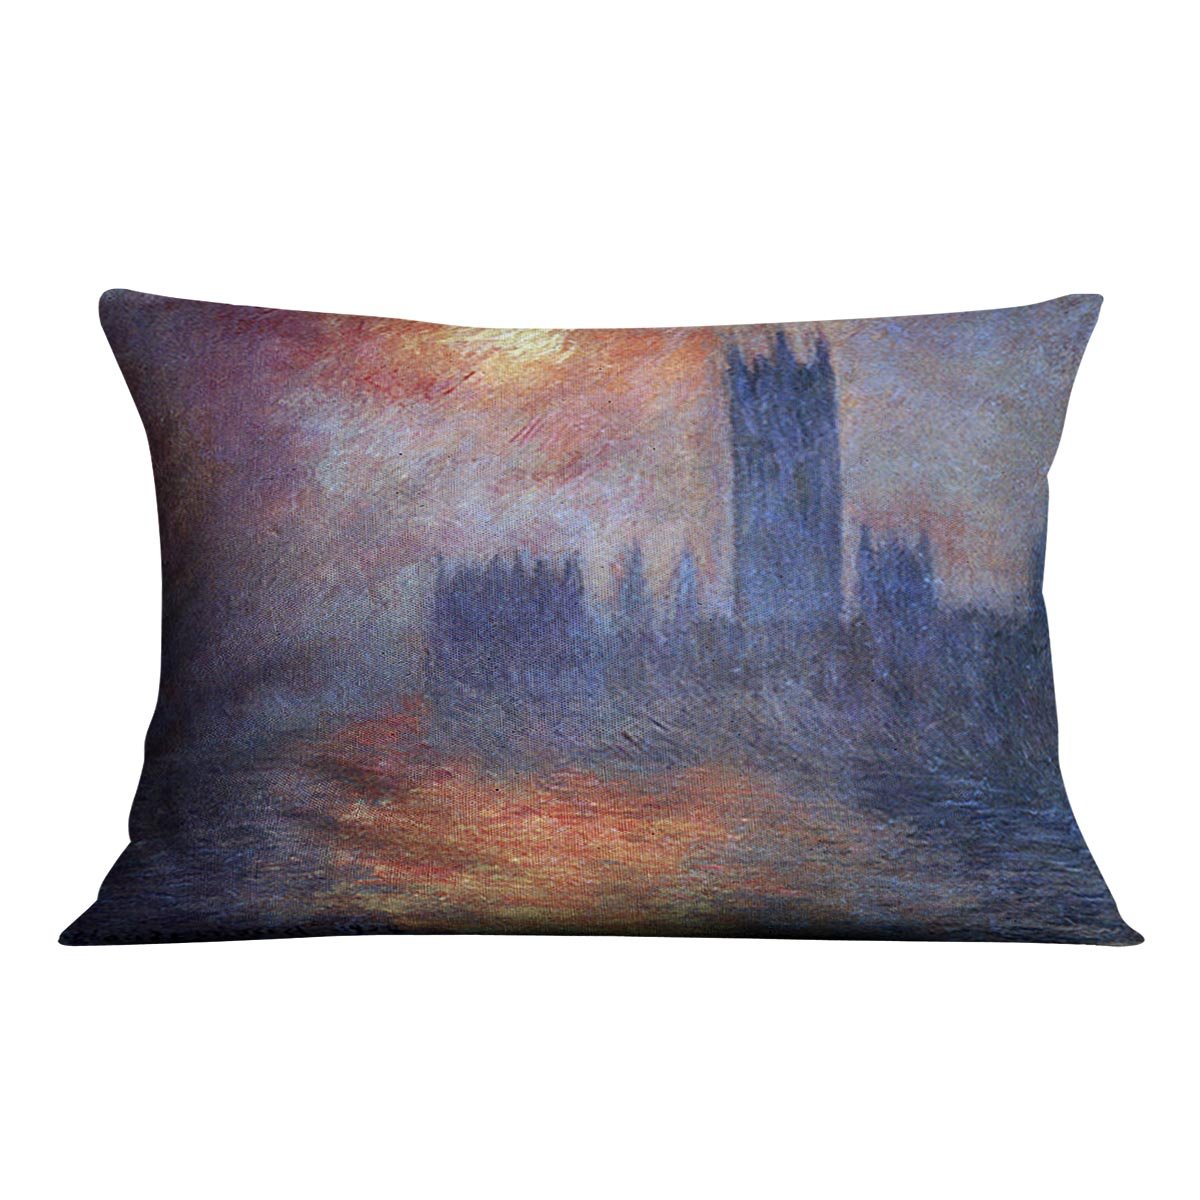 The Houses of Parliament Sunset by Monet Throw Pillow